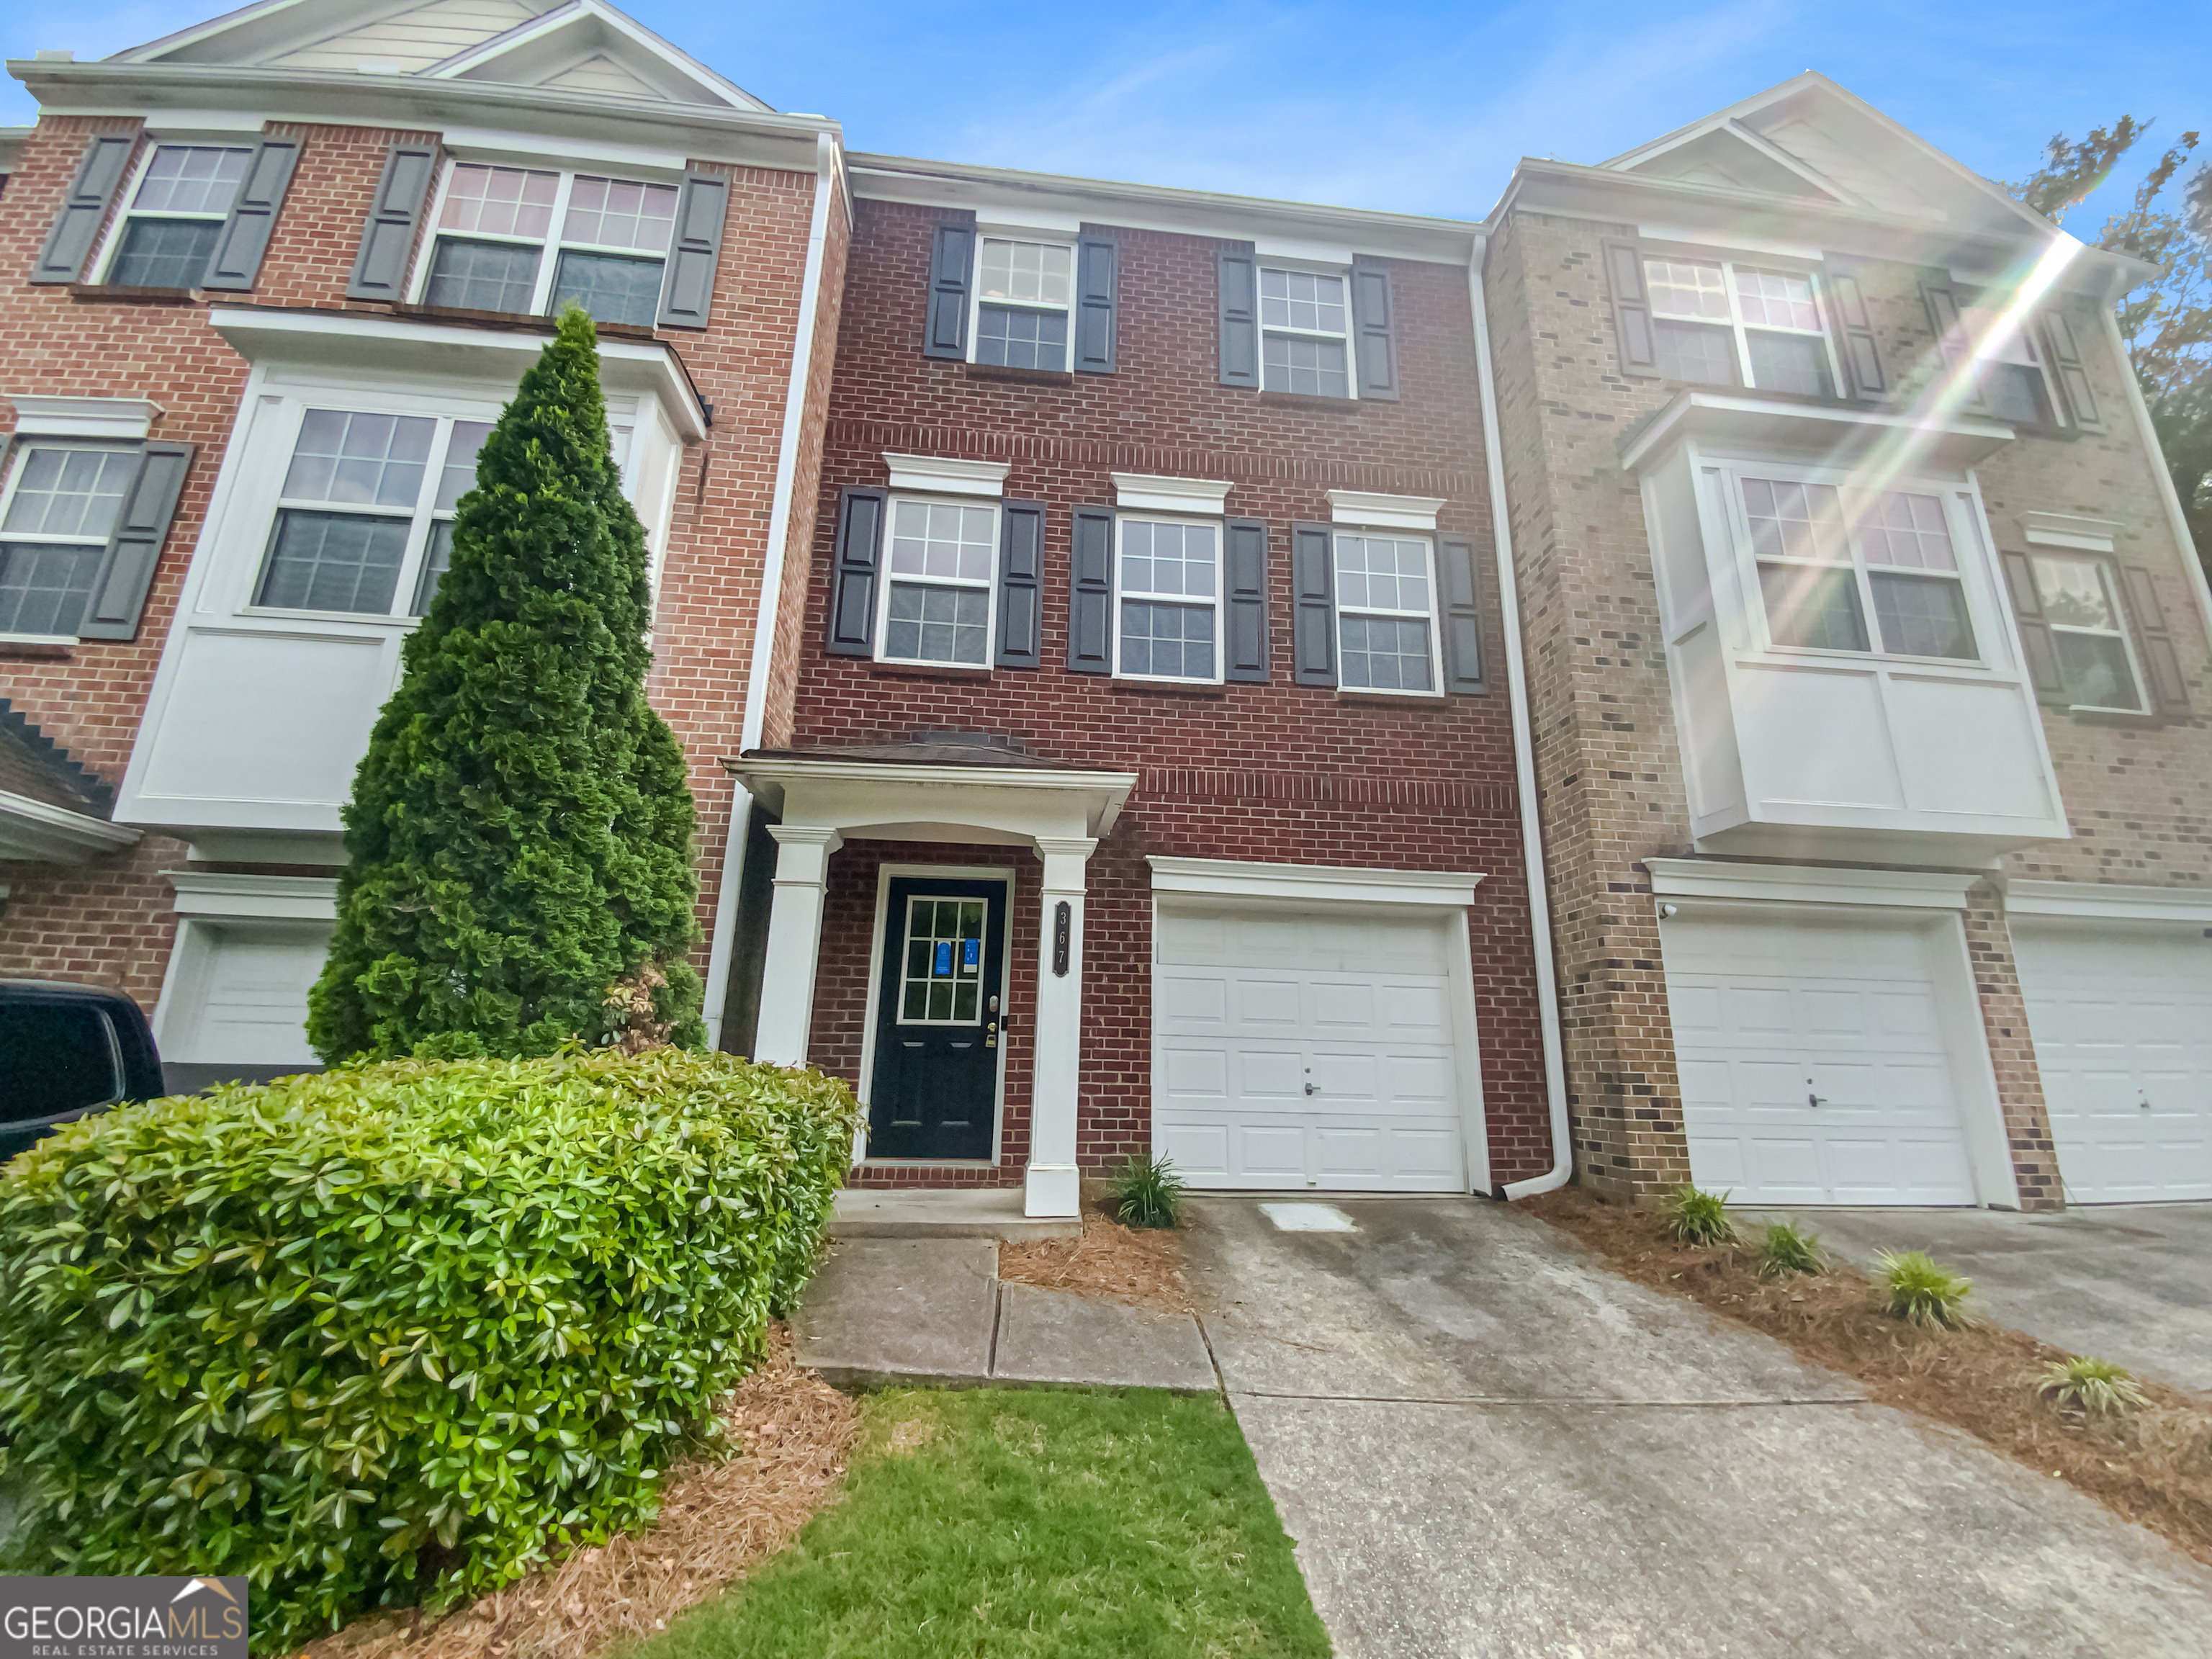 View Kennesaw, GA 30144 townhome